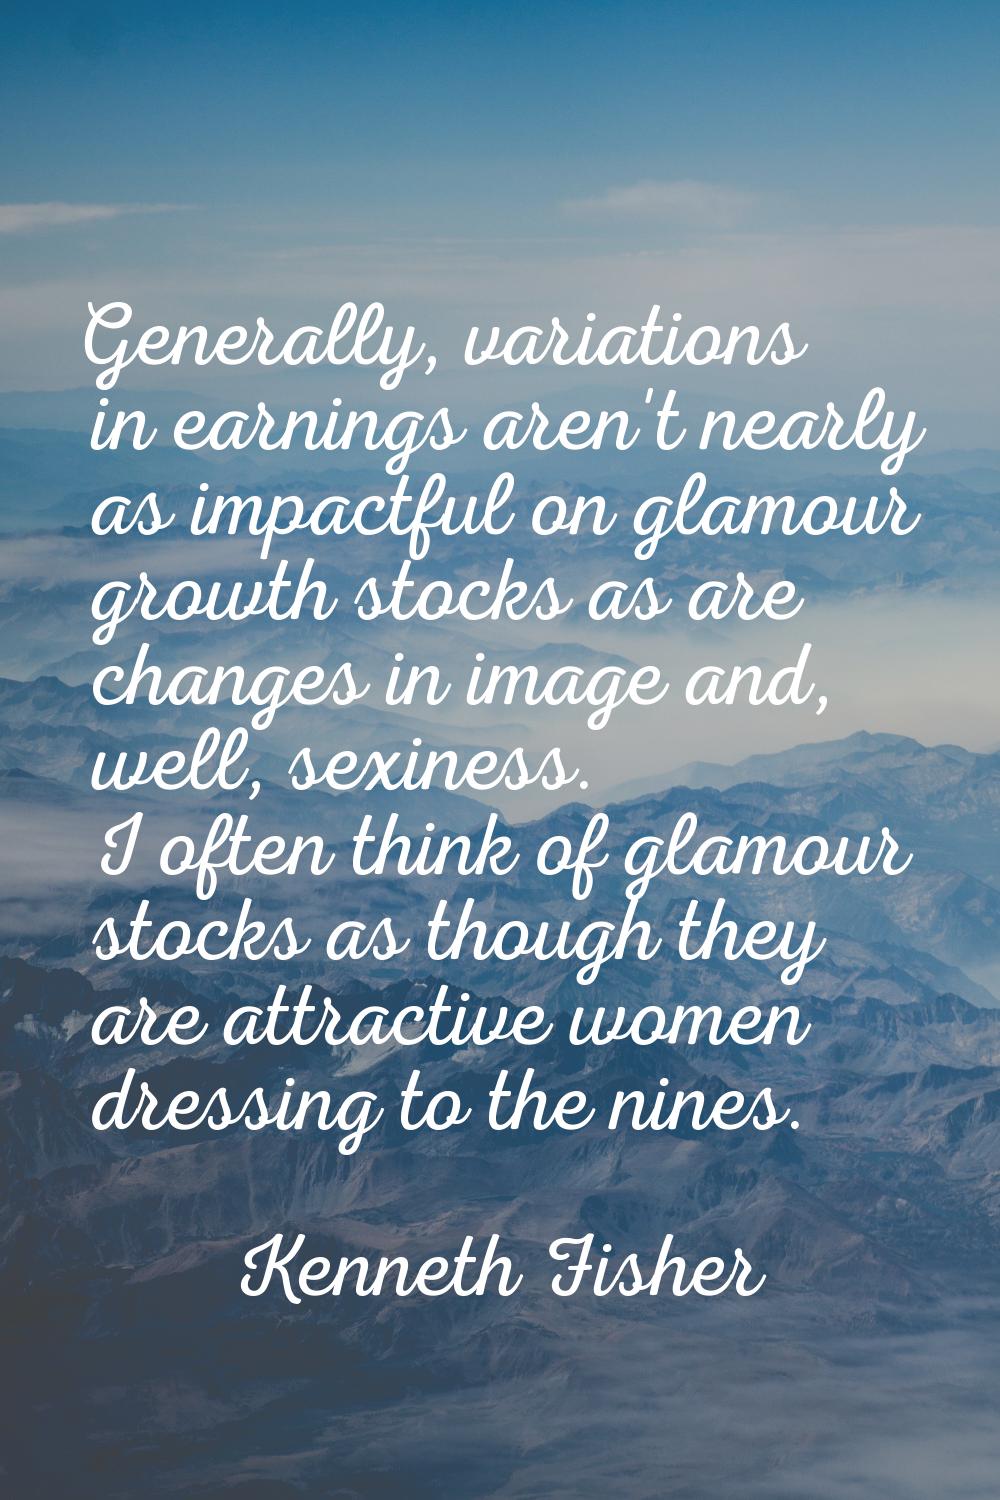 Generally, variations in earnings aren't nearly as impactful on glamour growth stocks as are change